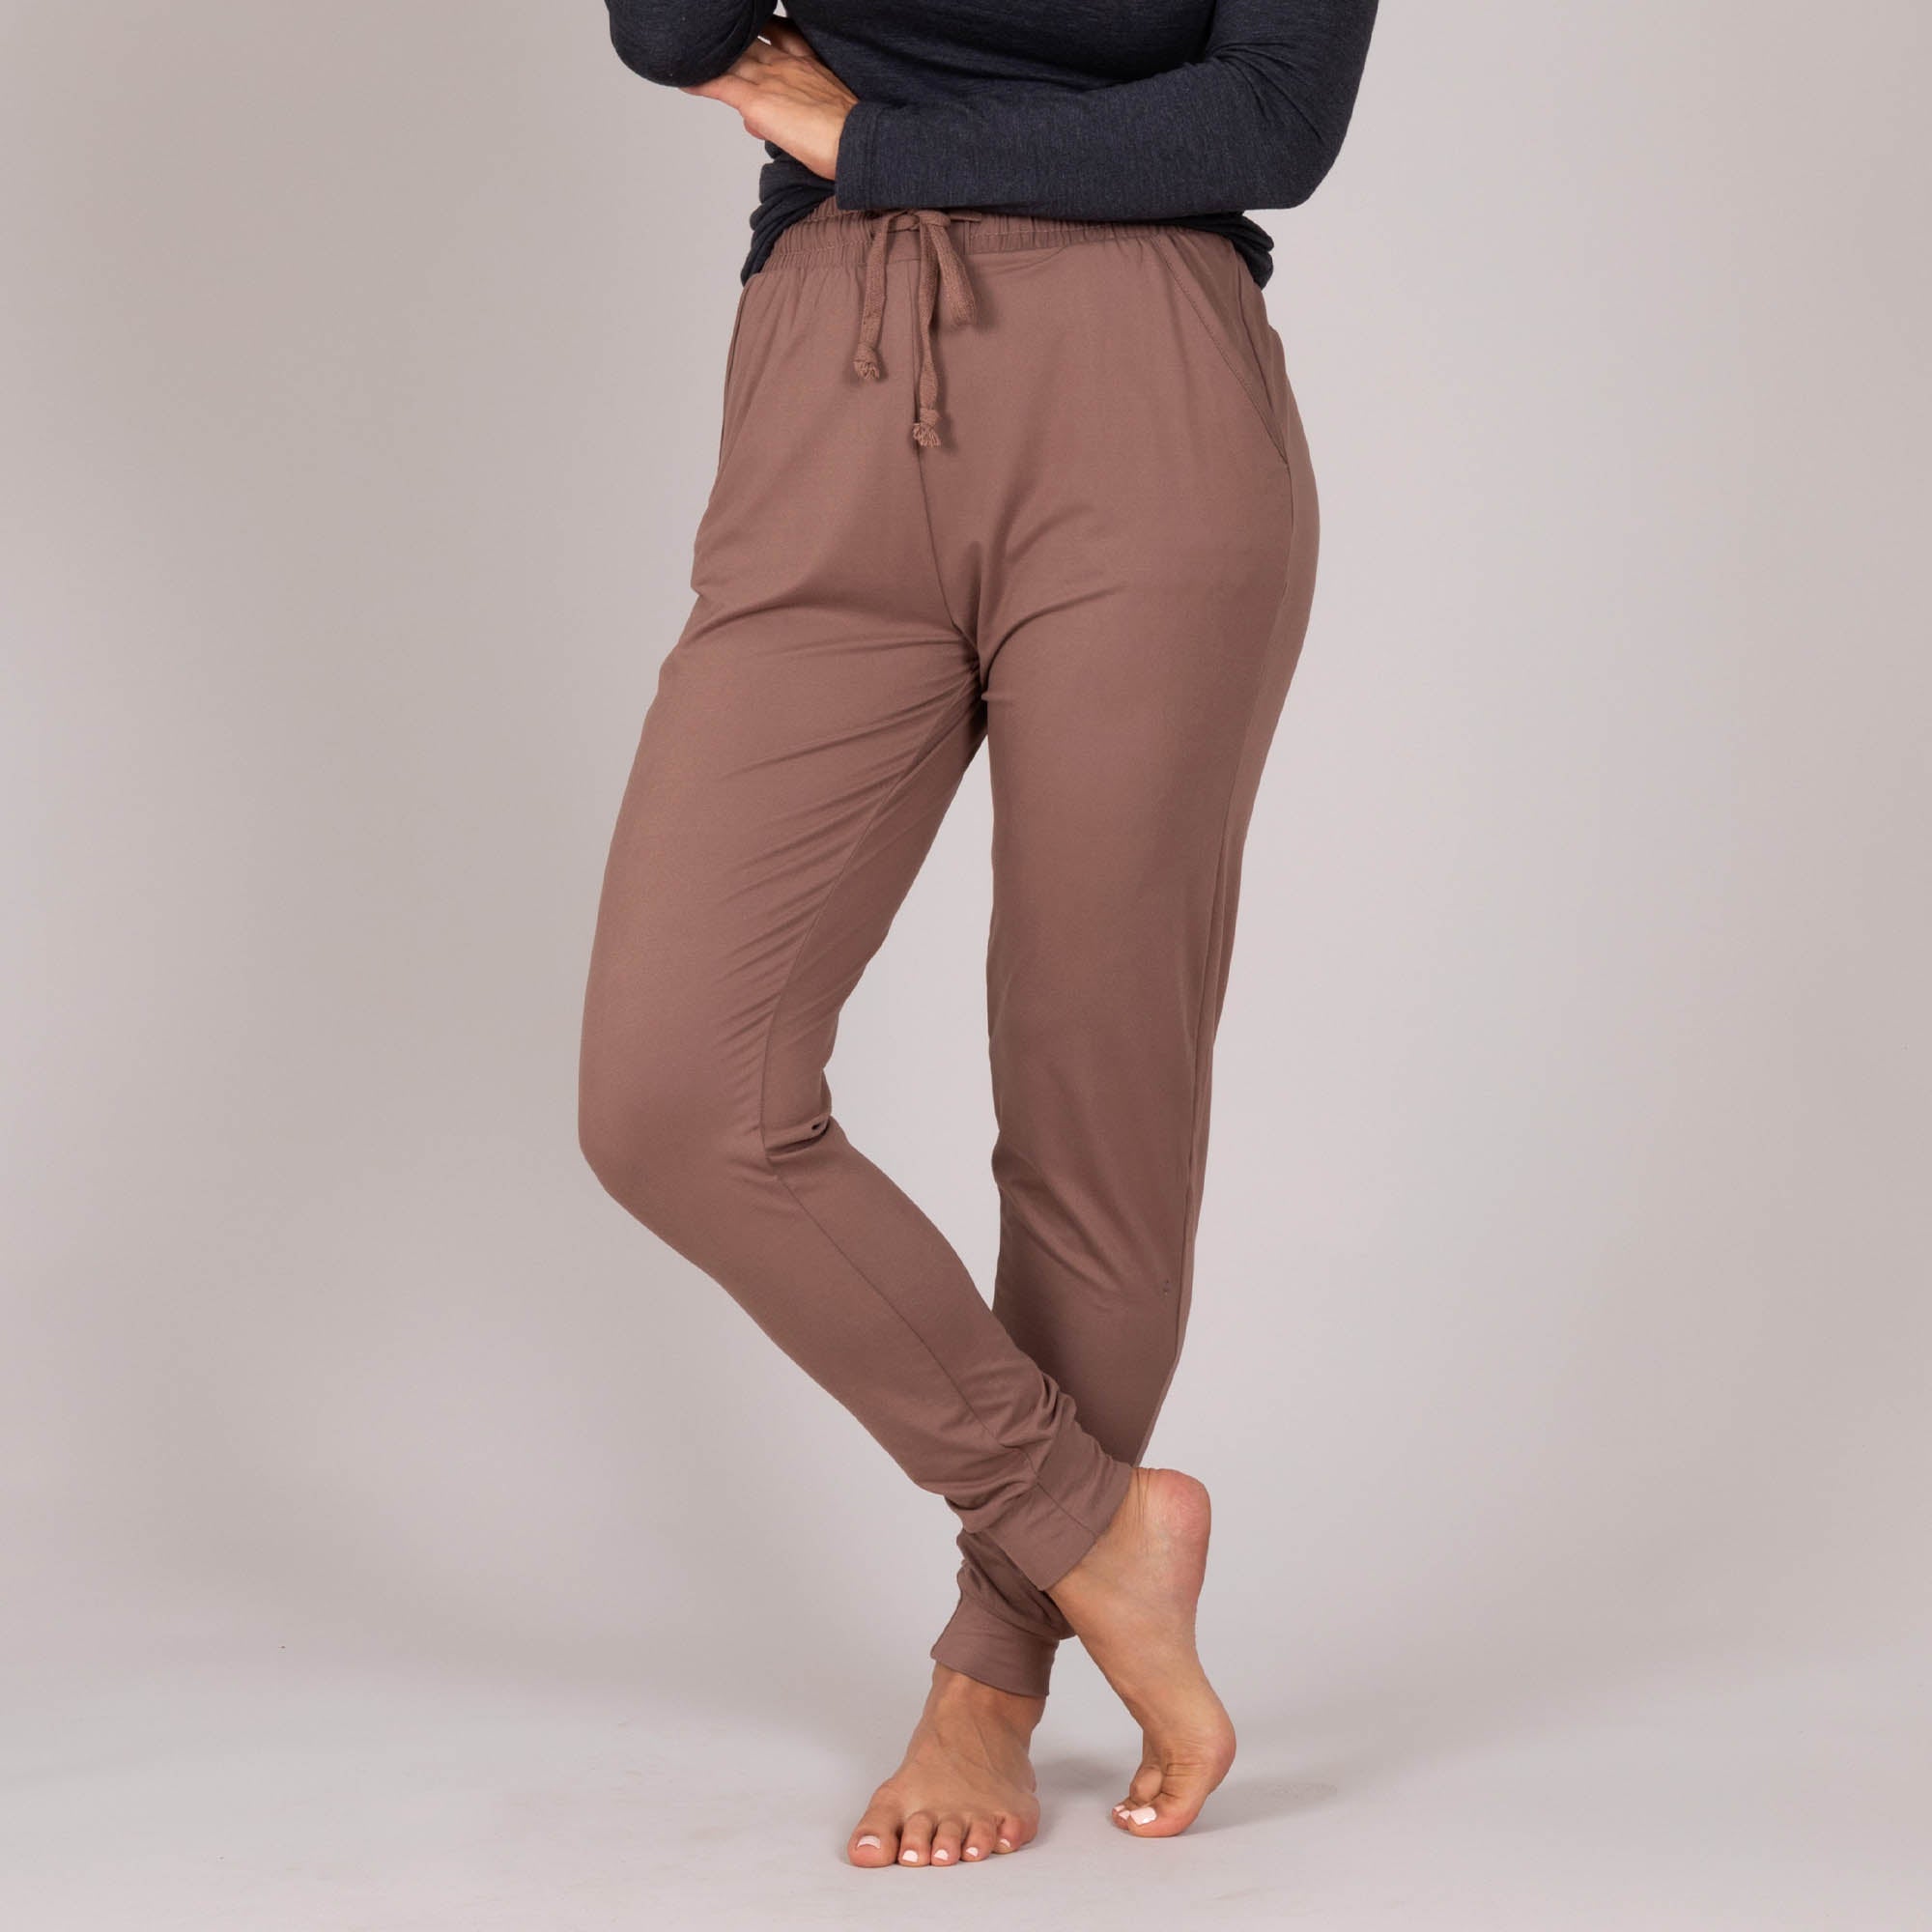 Solid Brushed Jogger Pants - Brown - 1X